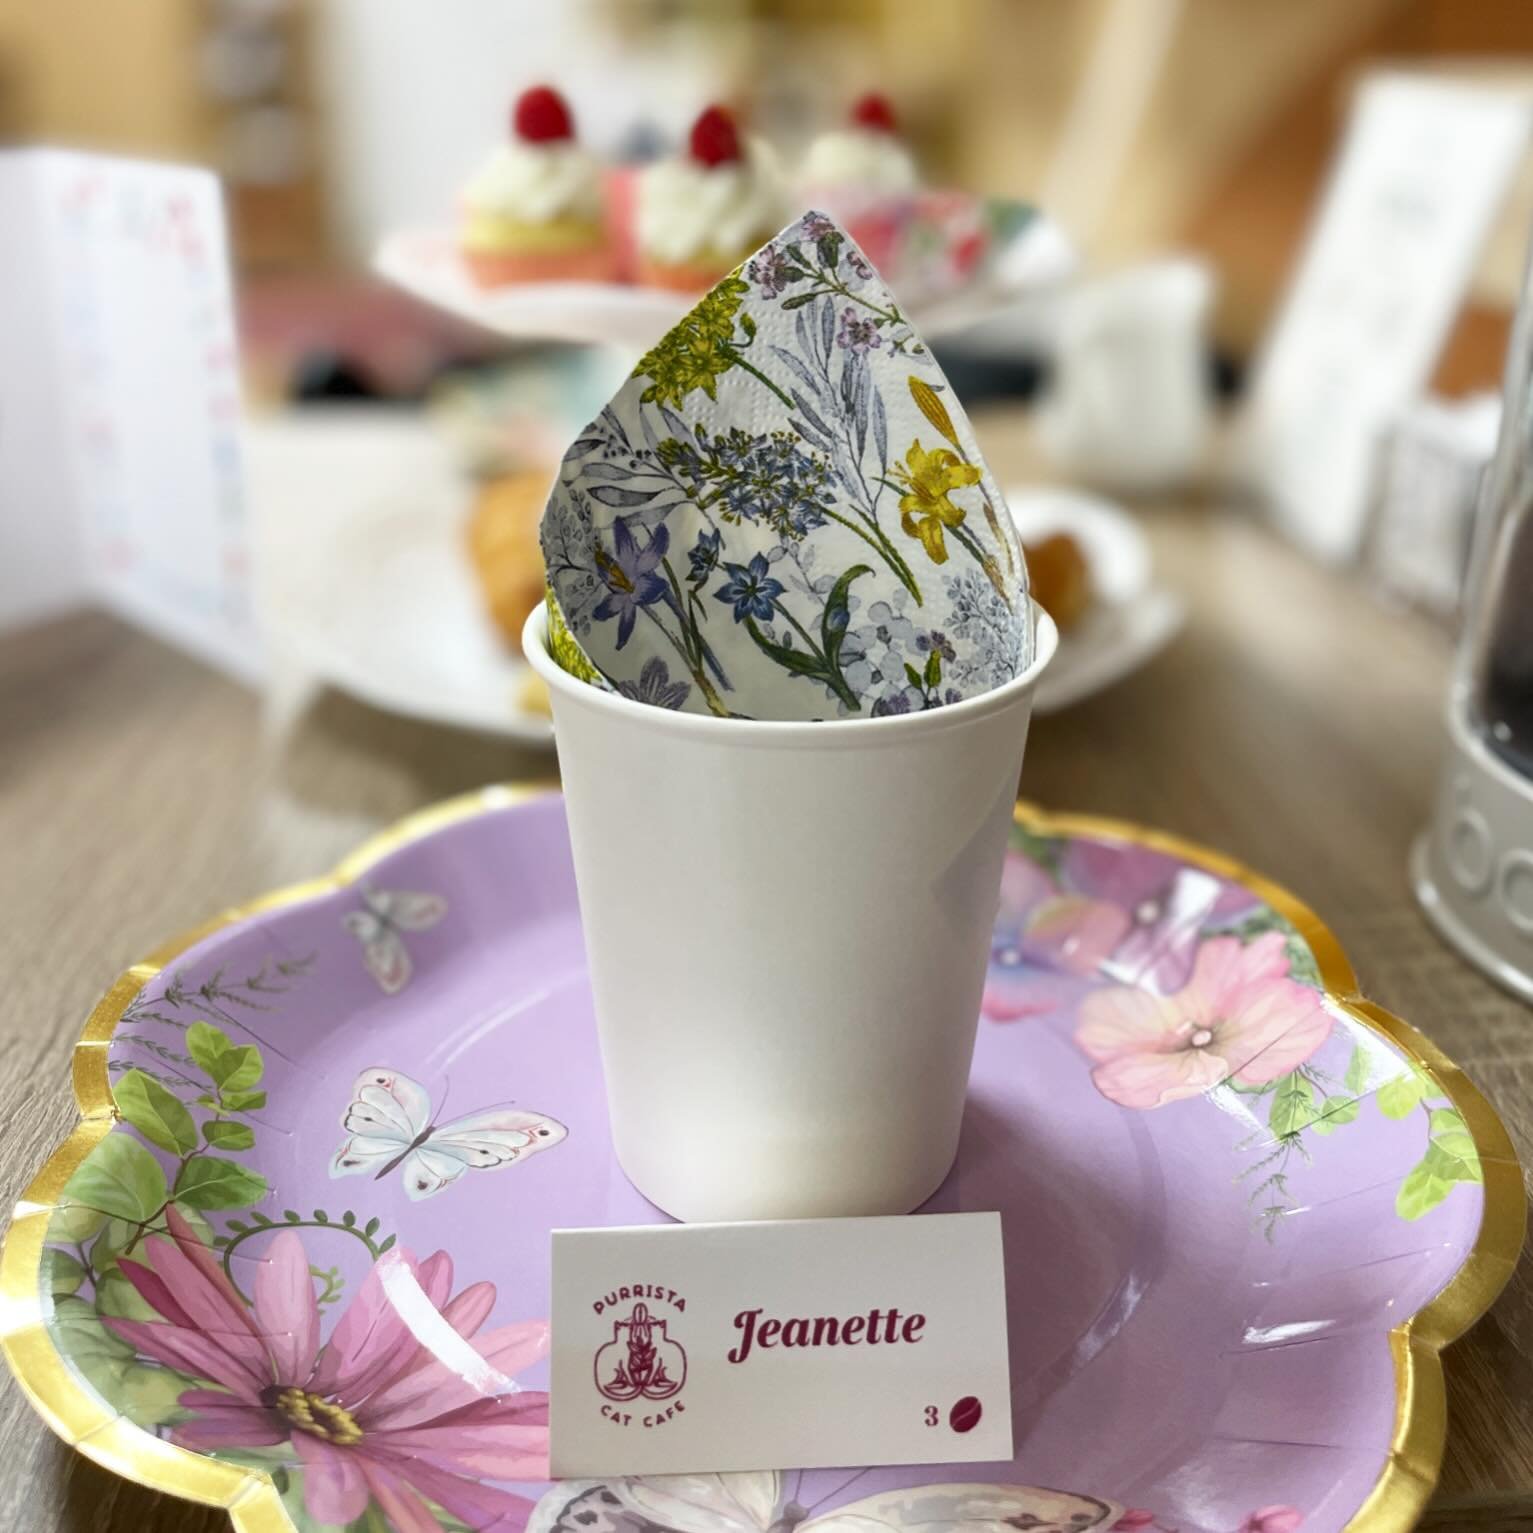 Last day to sign up for our Mother's Day Kit-TEA 
🌸🫖🐾
We have a few spots open at 1pm and one more spot at 3pm. Head to our website to sign up under special events: purristacatcafe.com

Each tea party receives a 3-tier tray of pastries, a choice o